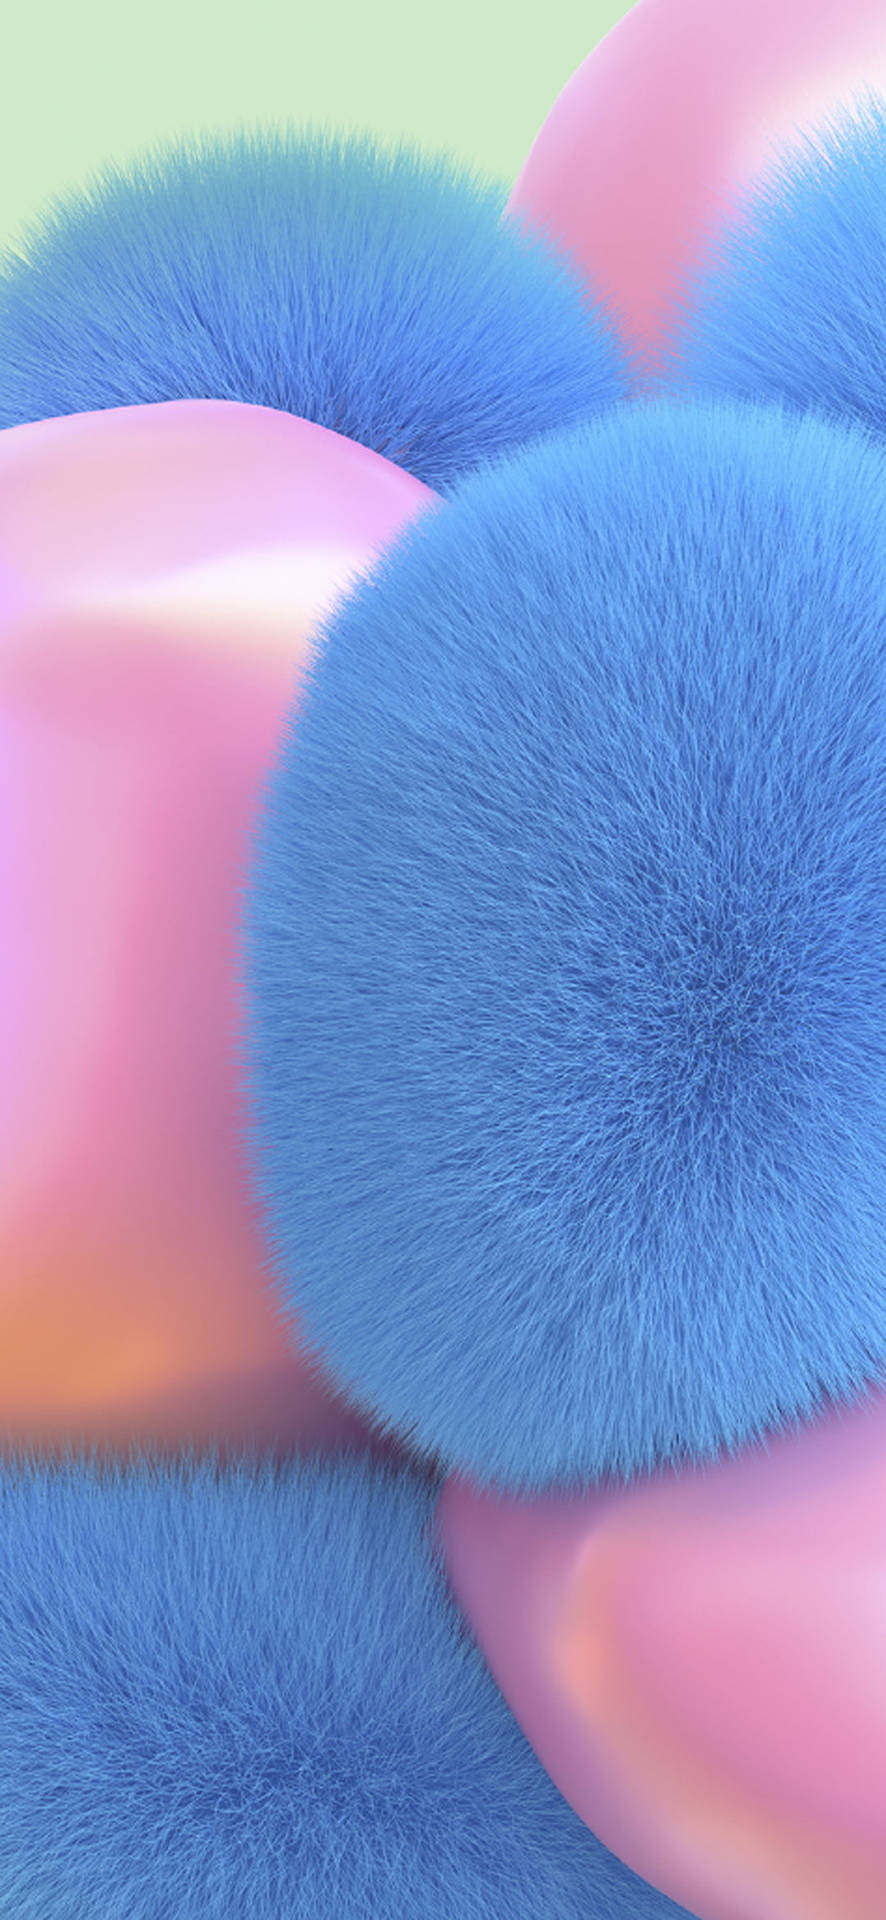 Soft And Fuzzy Balls On Samsung Full Hd Background